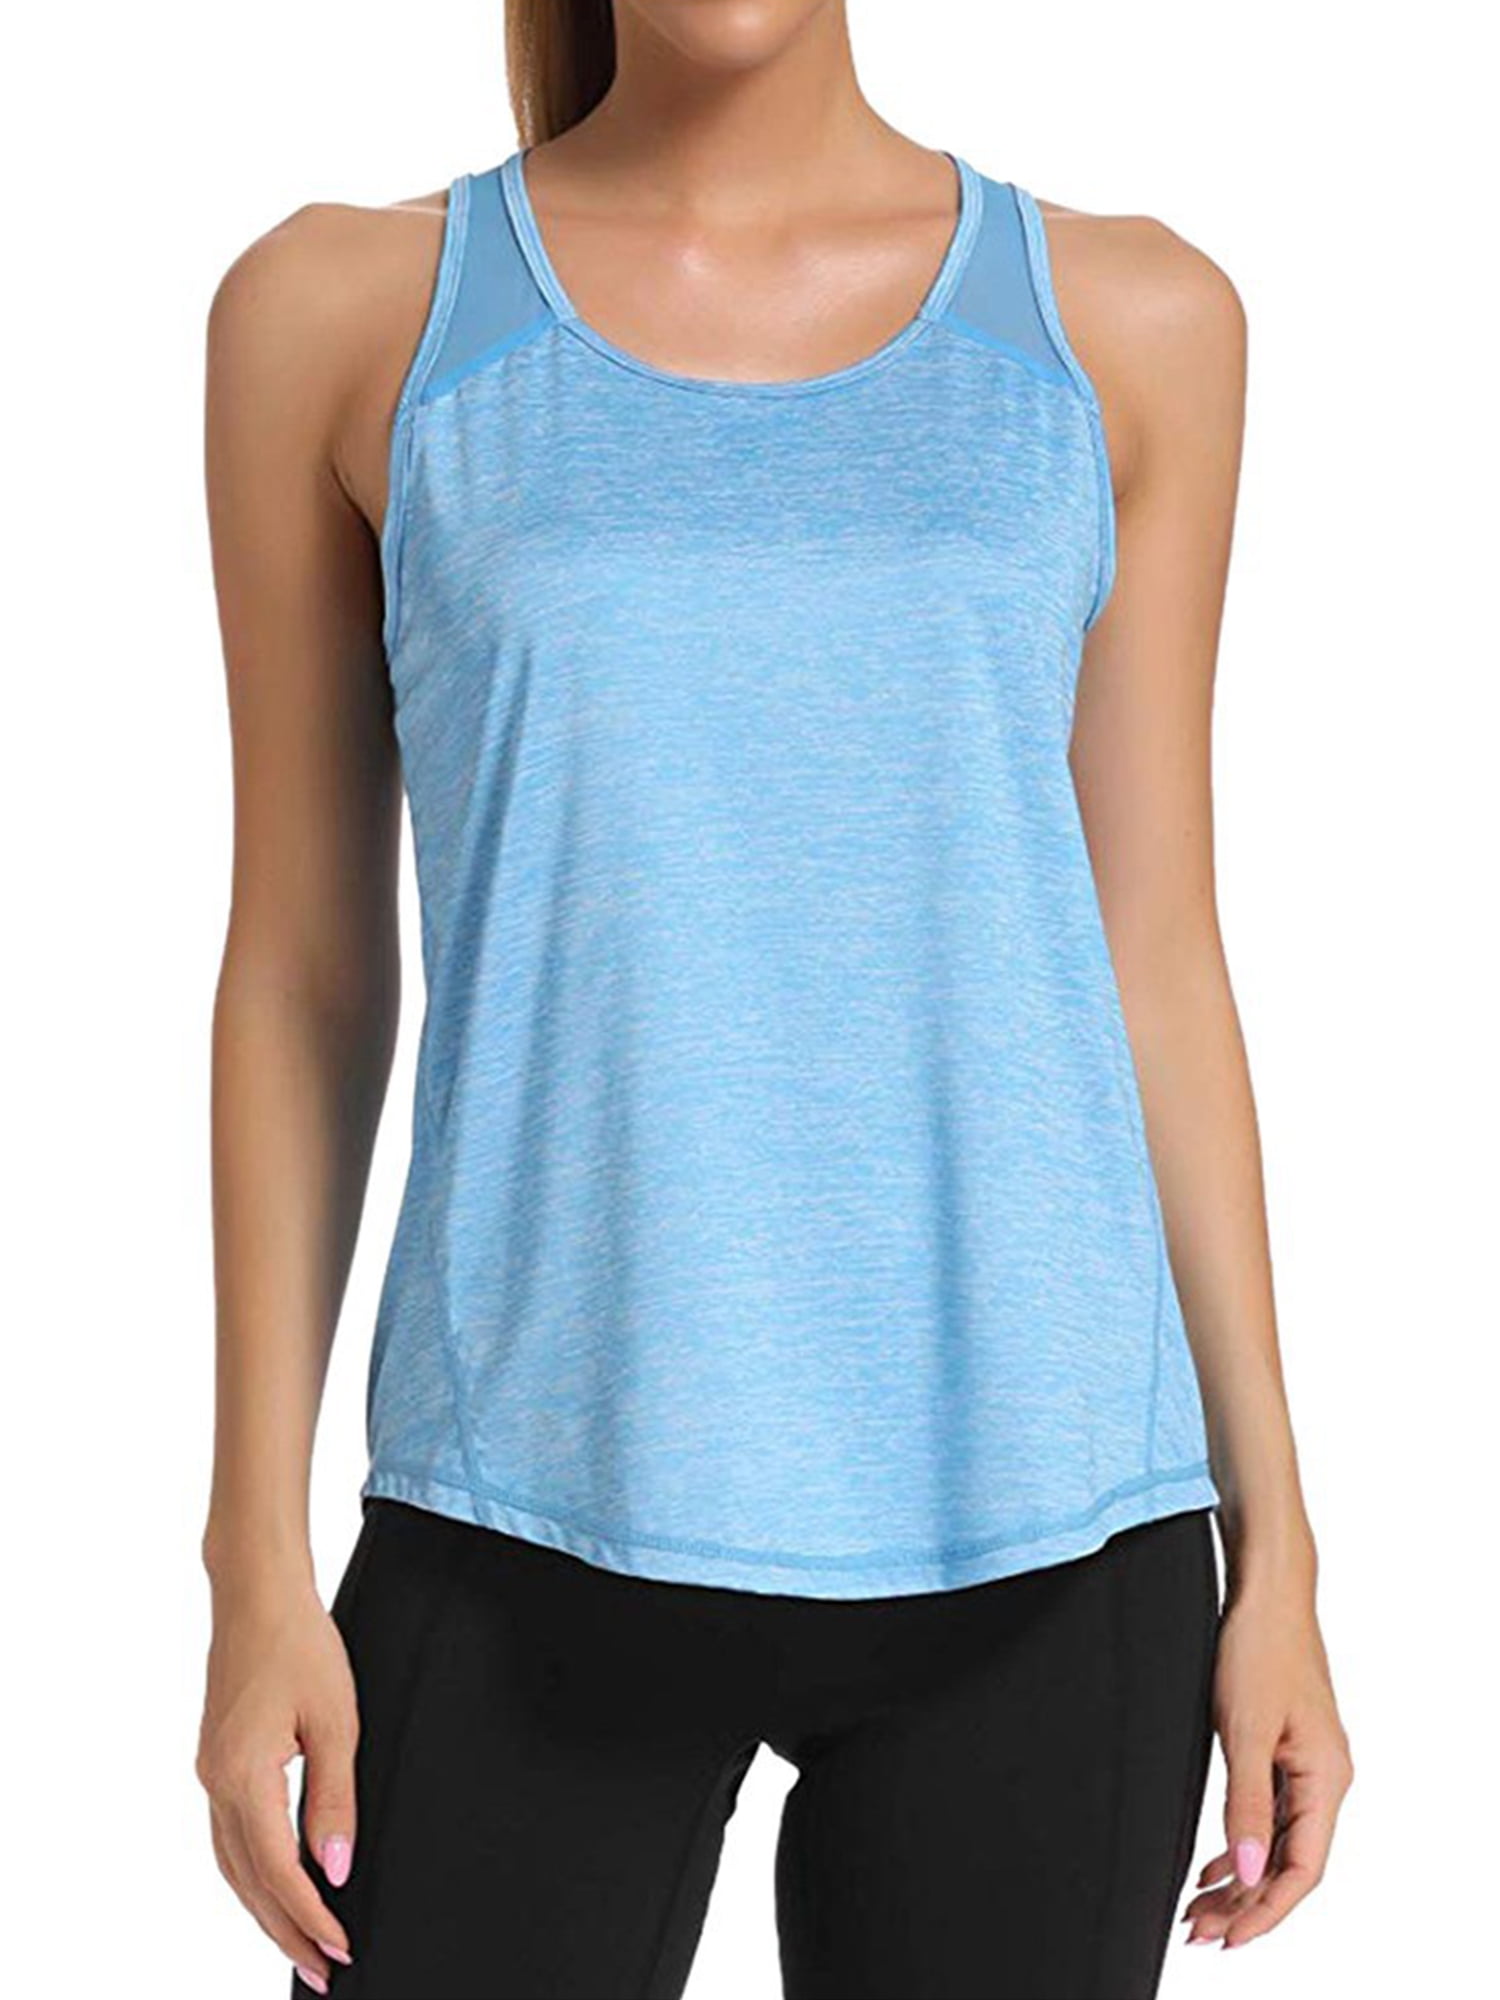 Casual Beach Tanks Loose Sports Tank Tops for Women Round Neck